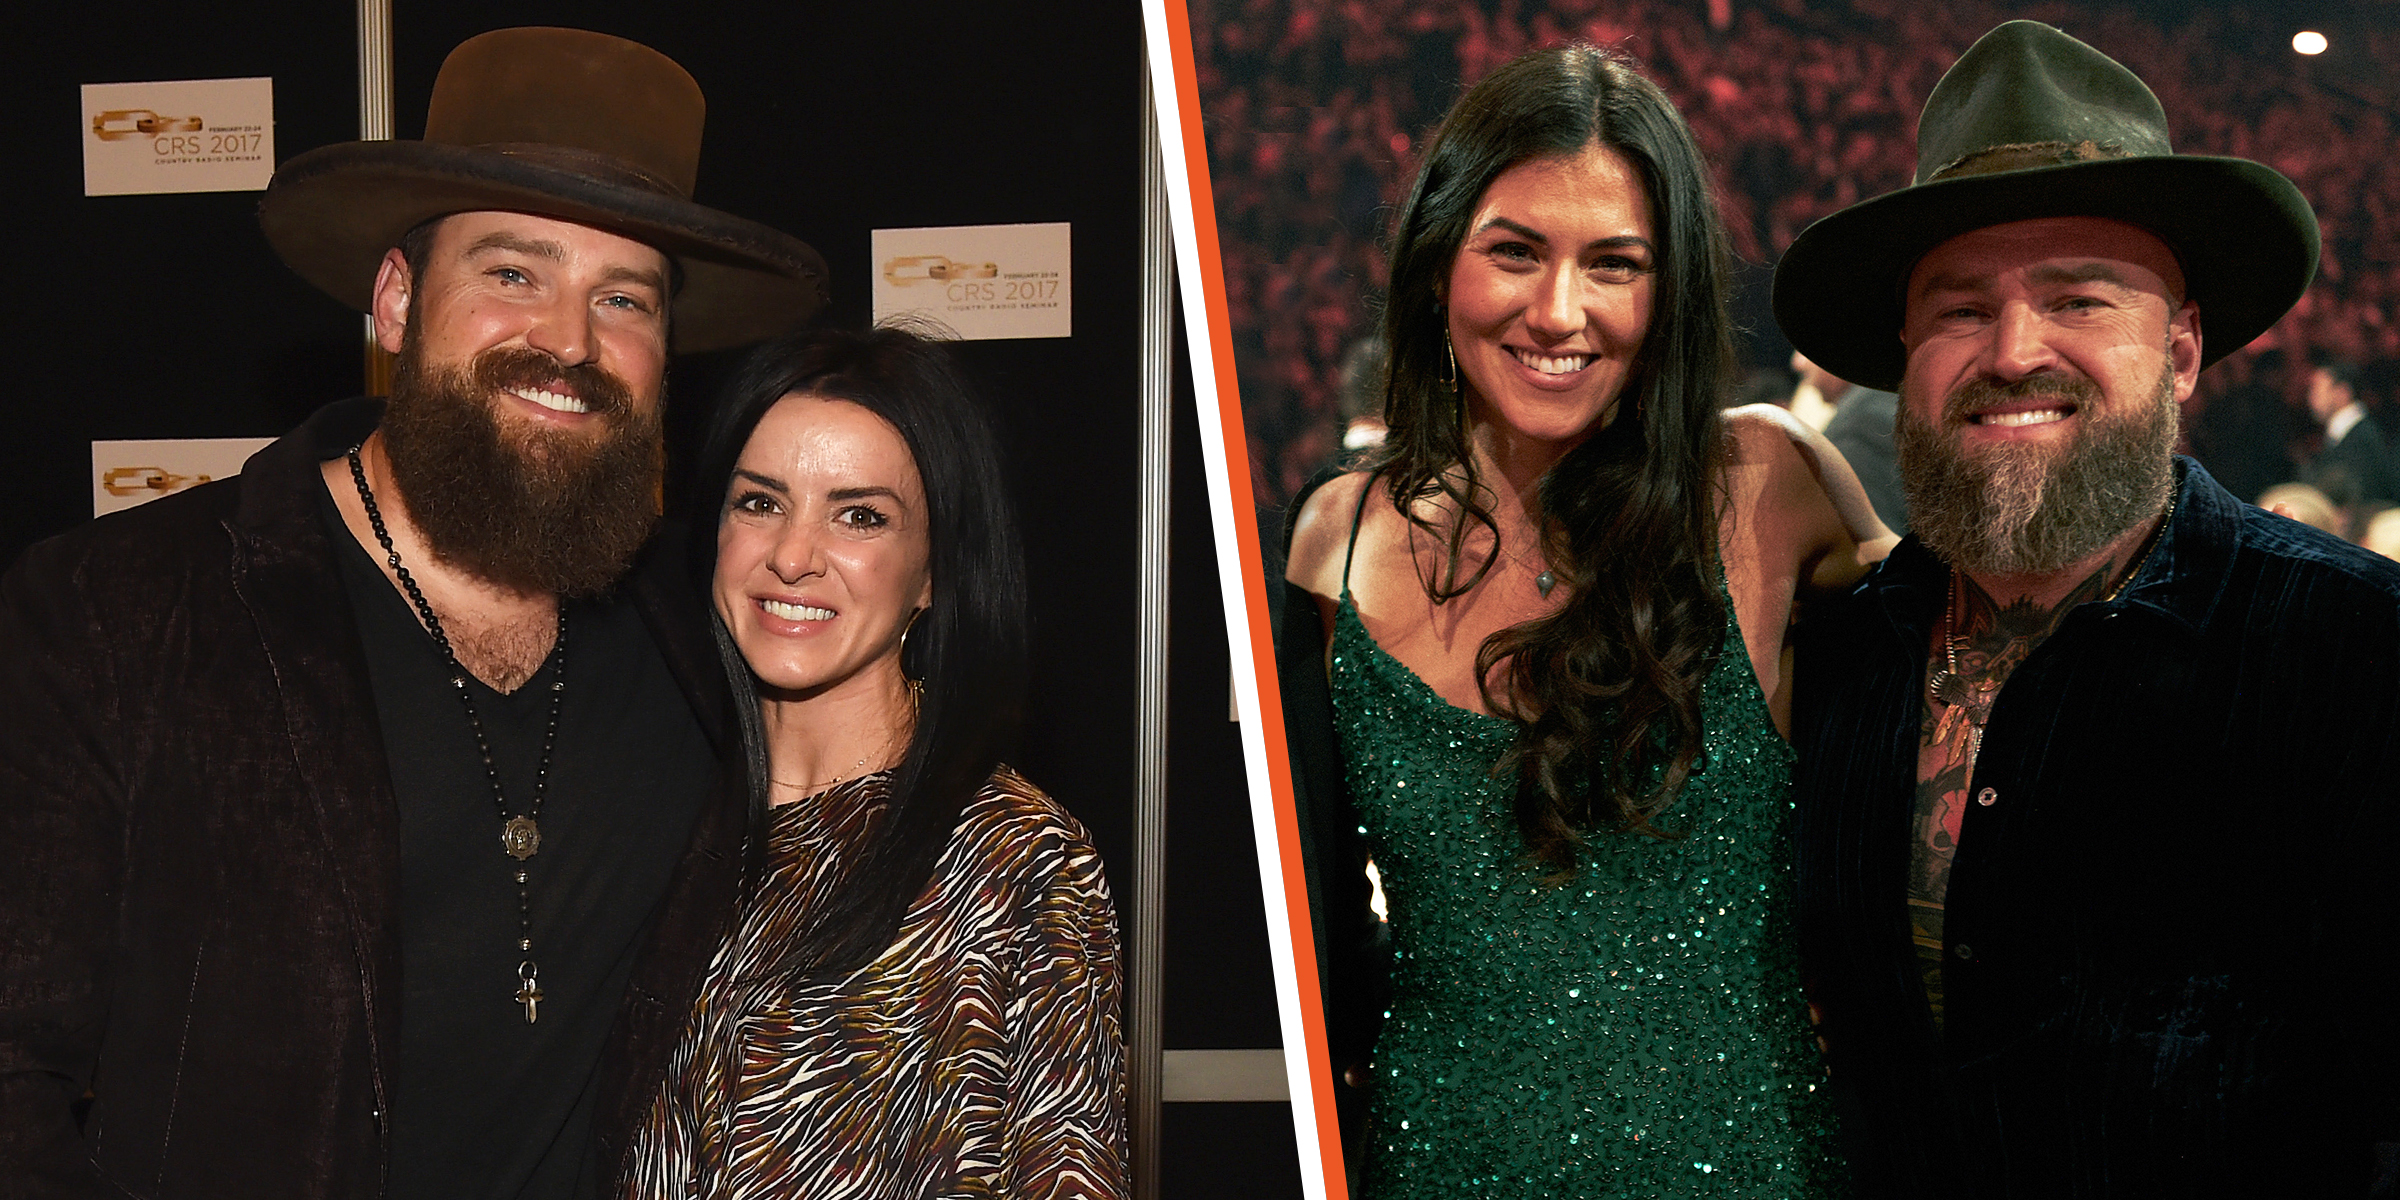 Zac Brown and Shelly Brown | Kelly Yazdi and Zac Brown | Source: Getty Images